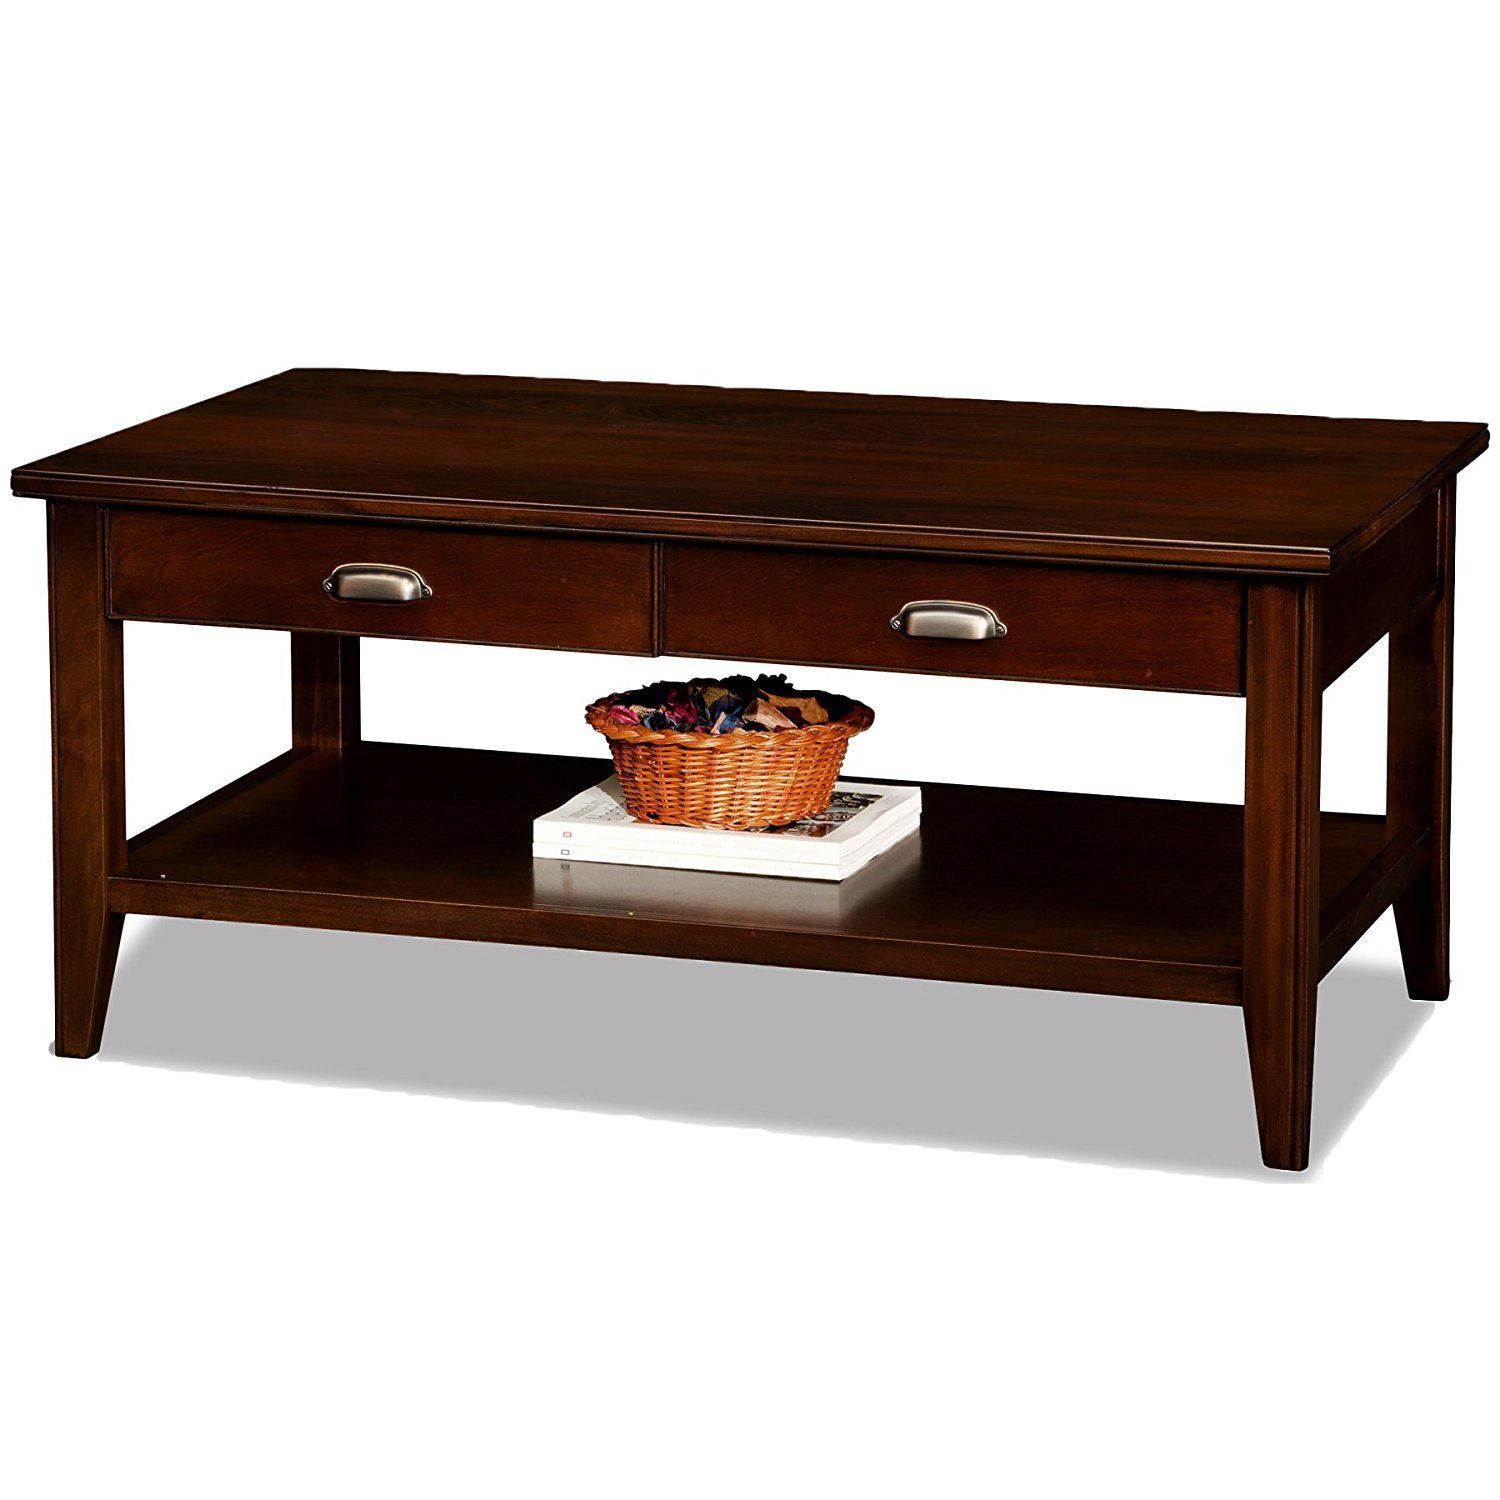 Solid Wood Coffee Table With Storage – Home Furniture Design With Espresso Wood Storage Console Tables (View 4 of 20)